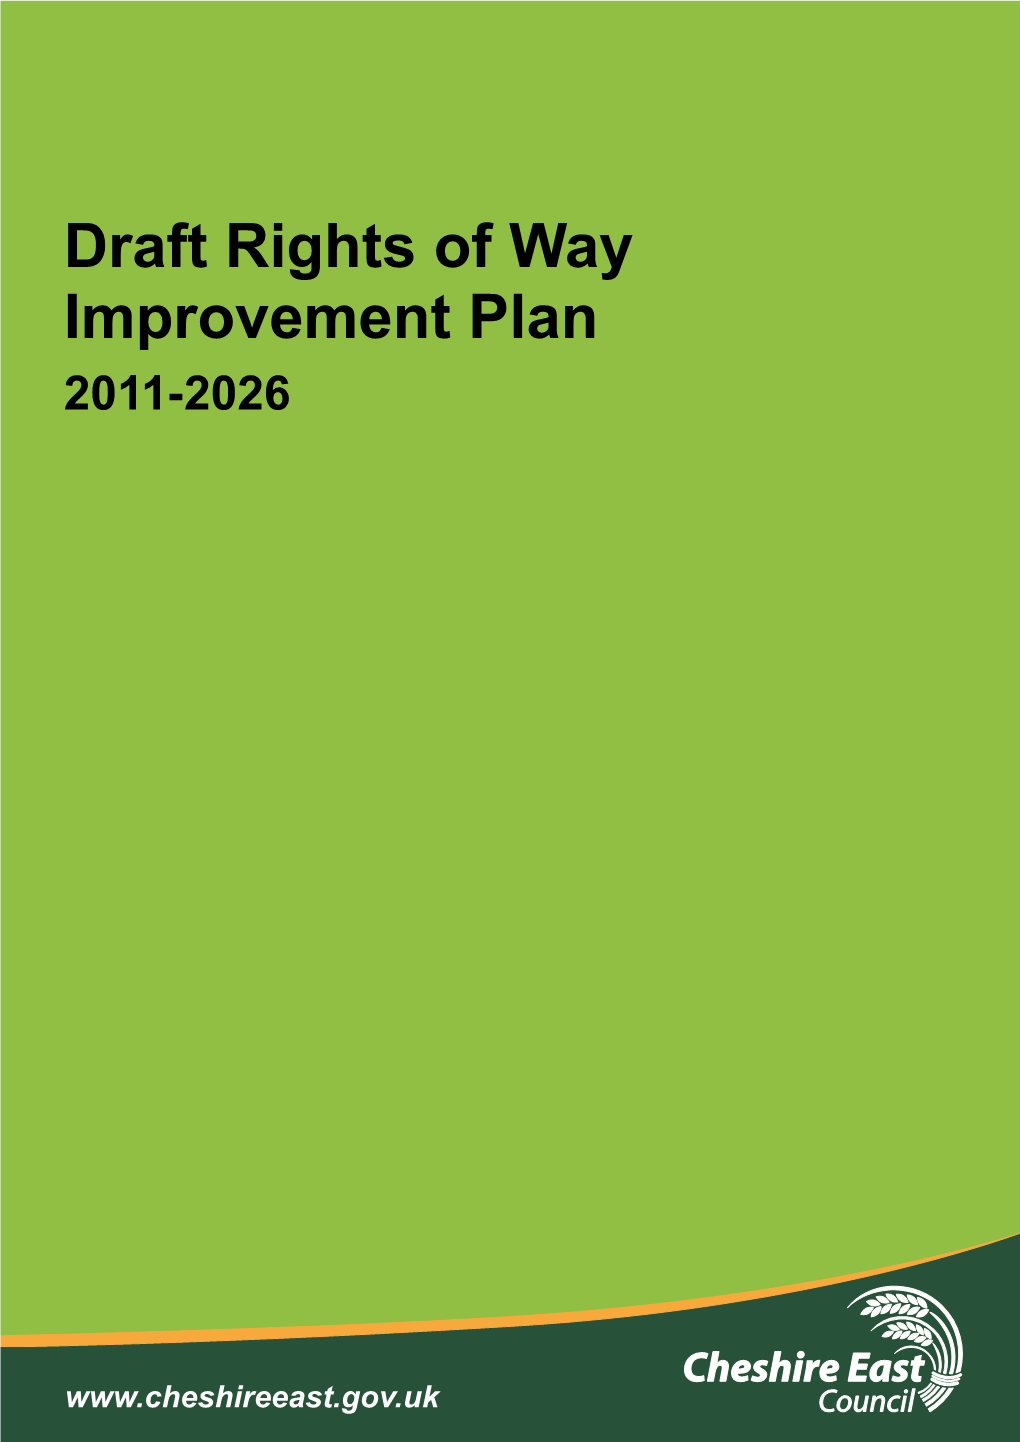 Draft Cheshire East Rights of Way Improvement Plan 2011-2026 Contents